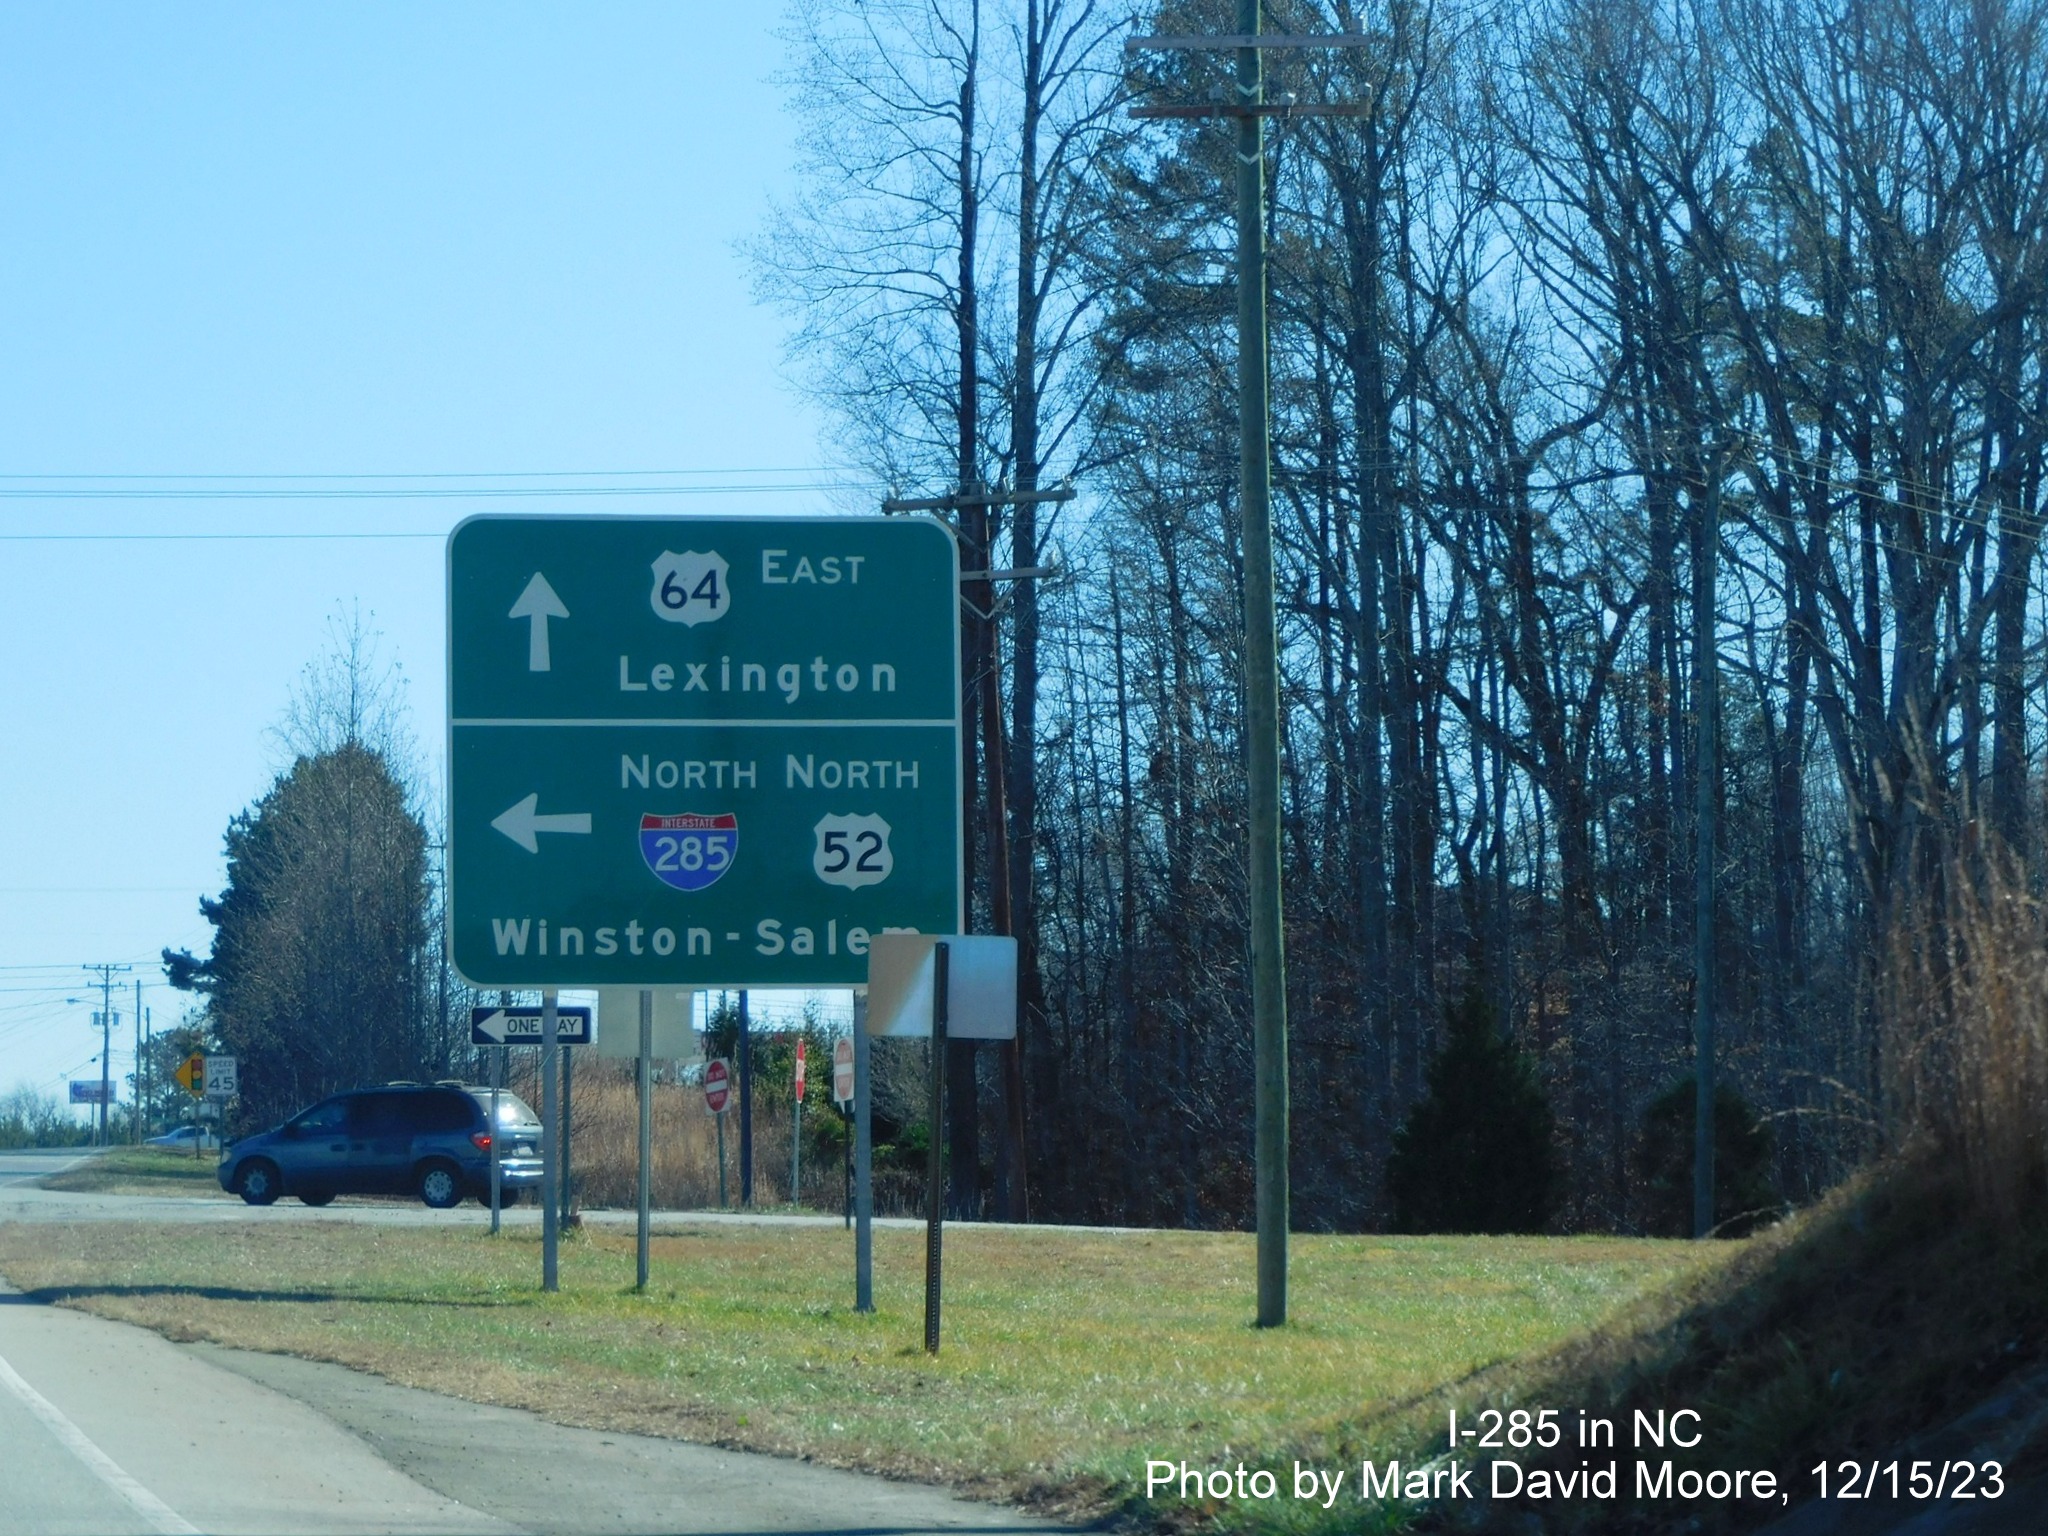 Image of ramp signage for I-285 and US 52 North on US 64 East in Lexington, by Mark David Moore, December 2023